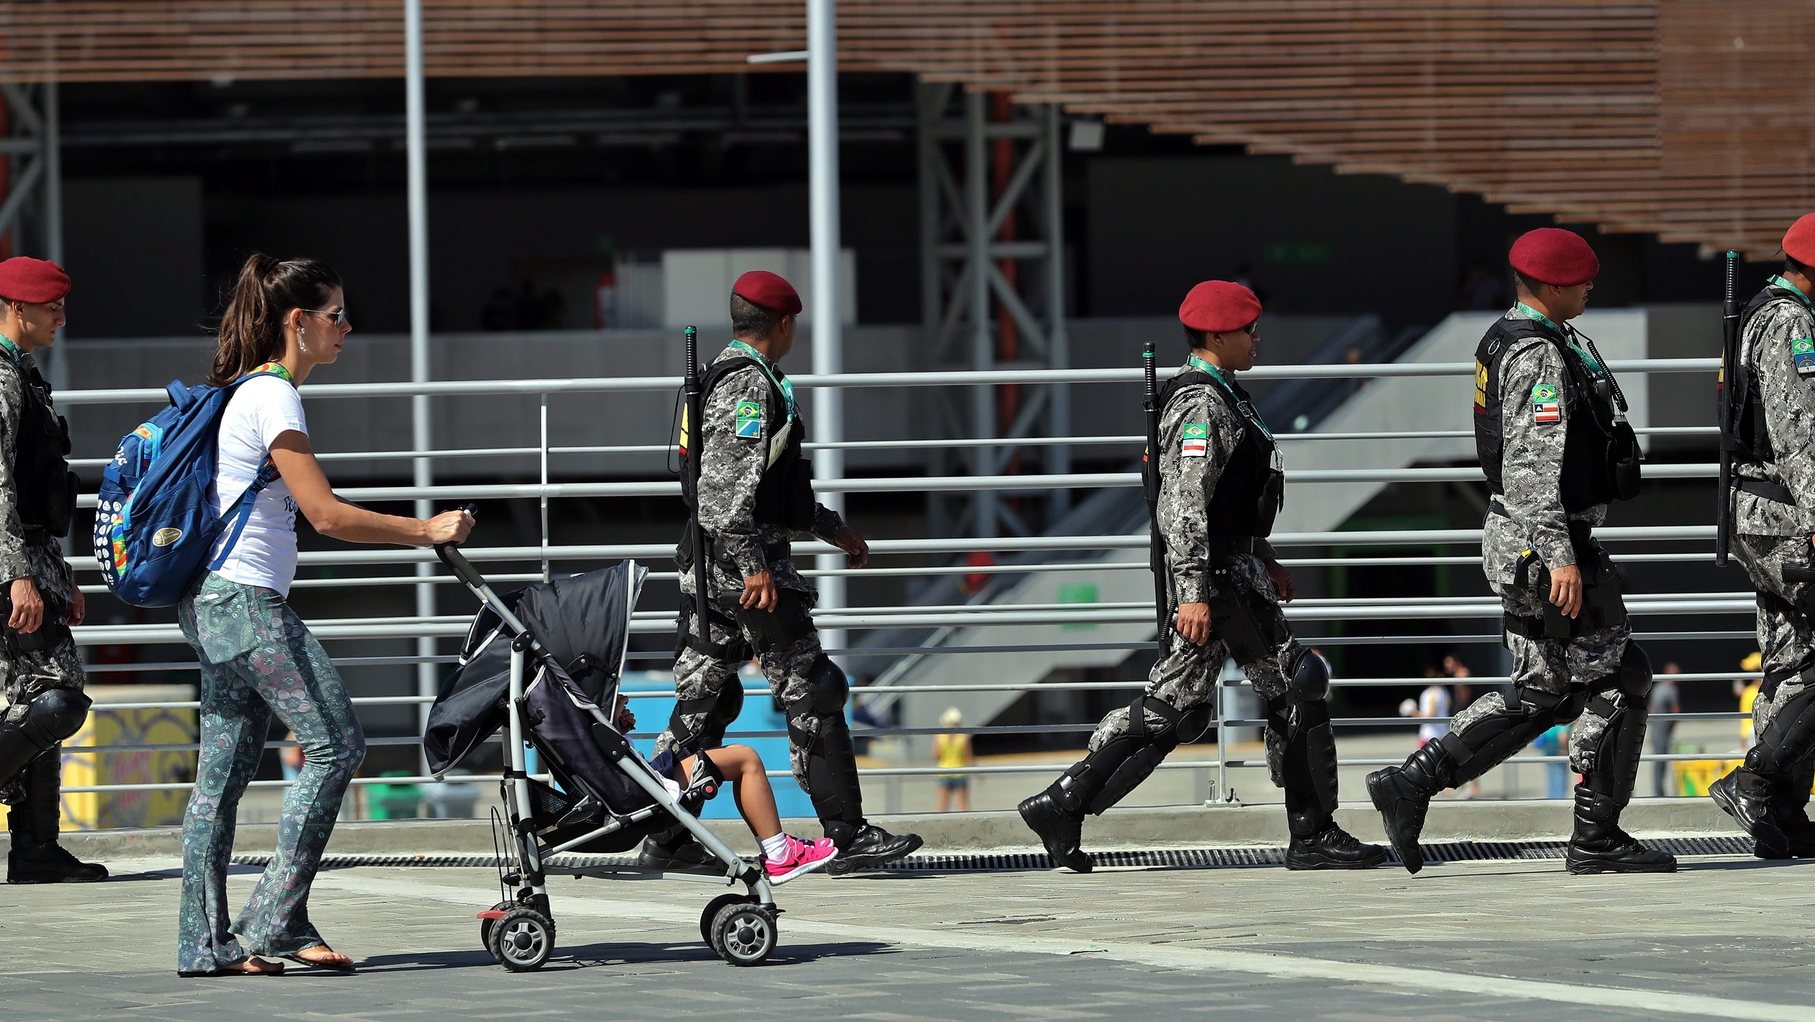 epa05481048 Members of the Forca Nacional, national public security force, in the Barra Olympic Park on the second weekend of the Rio 2016 Olympic Games in Rio de Janeiro, Brazil, 13 August 2016.  EPA/ALEJANDRO ERNESTO